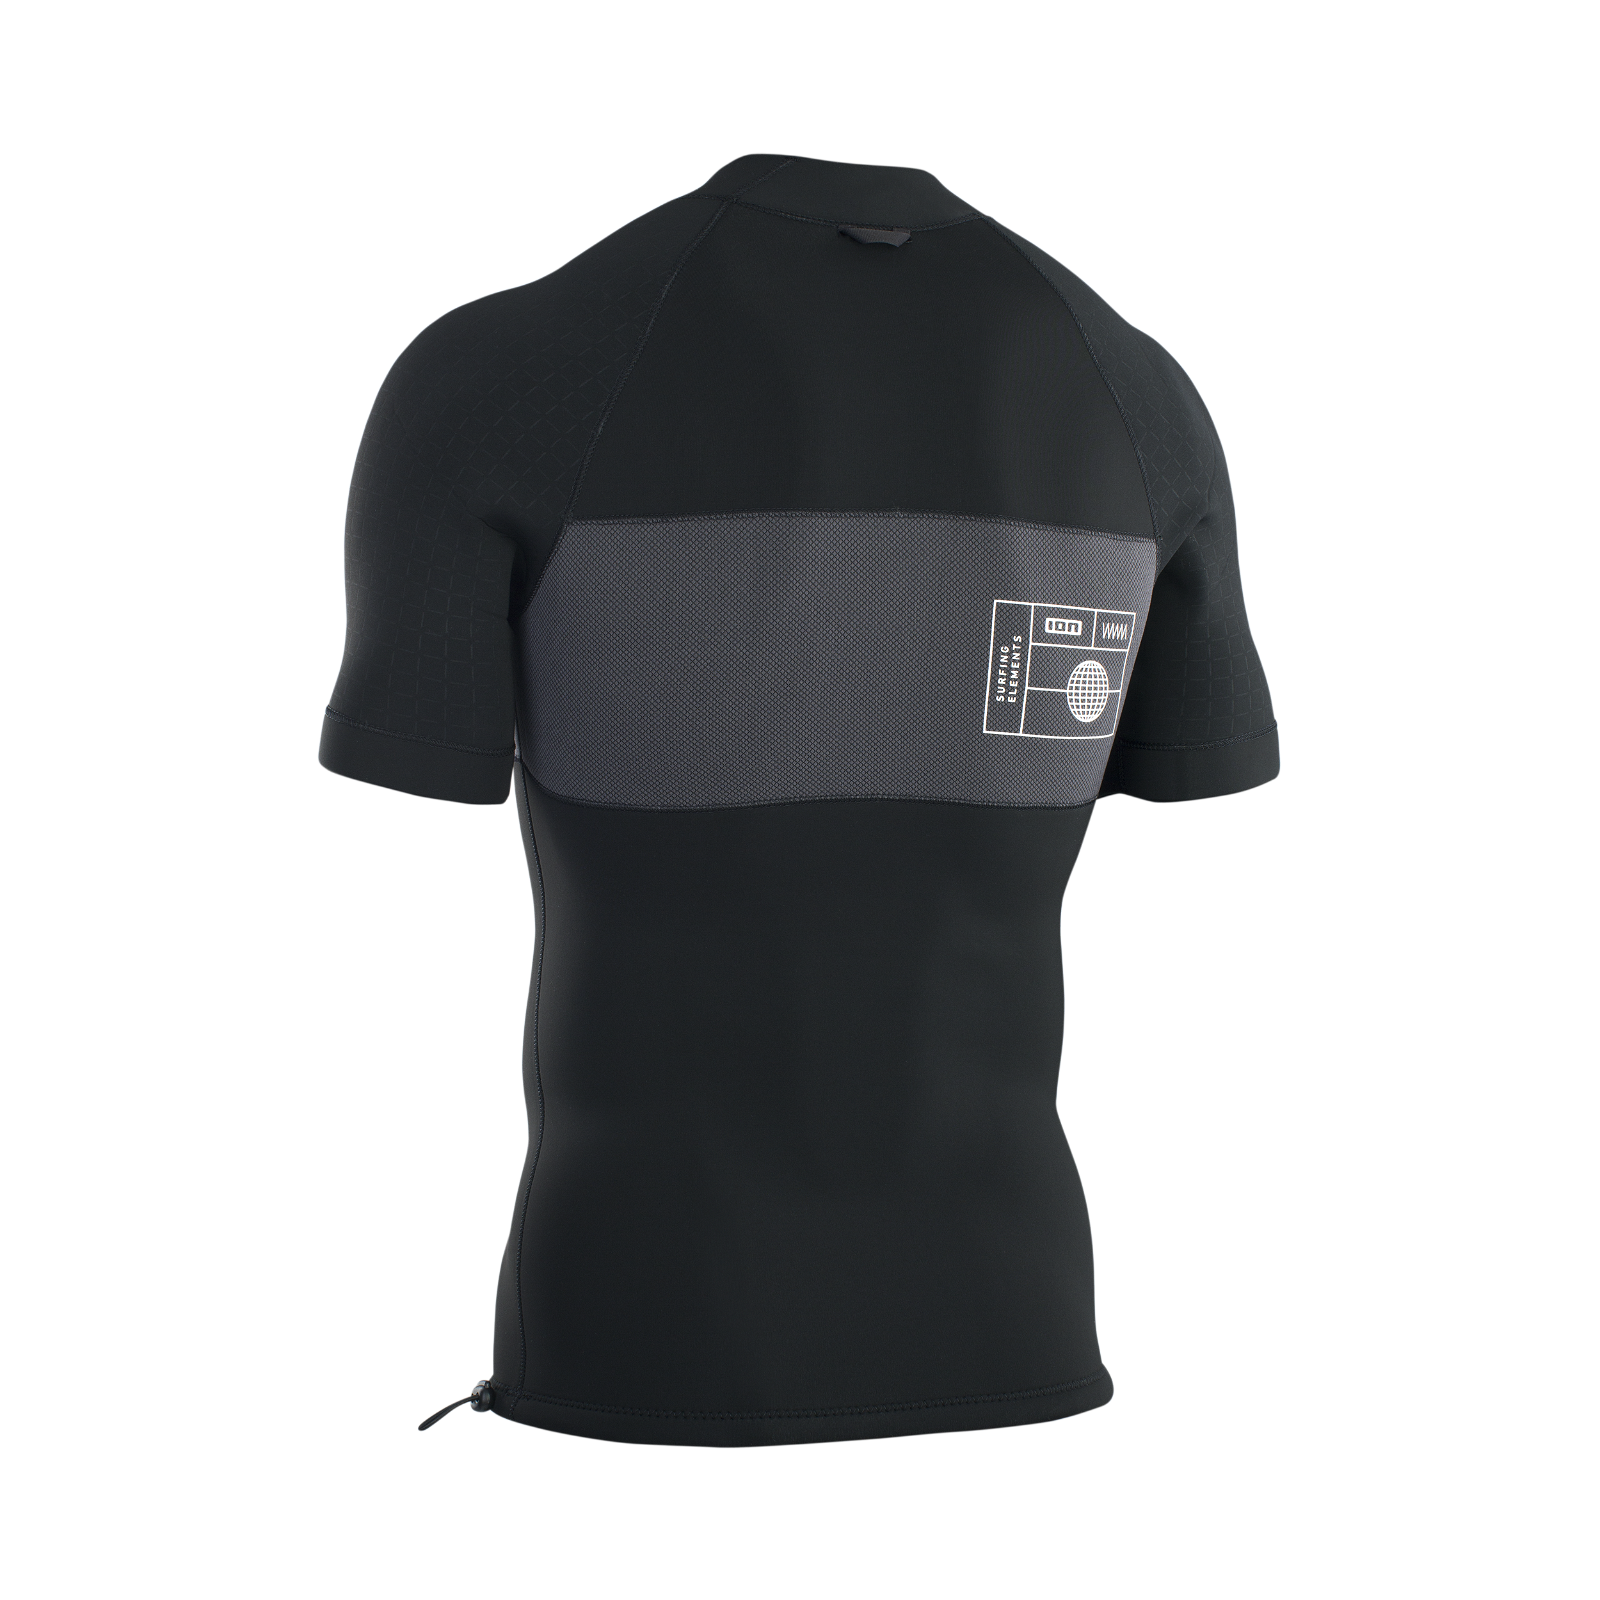 ION Neo Top 2/2 SS men 2024-ION Water-L-990 black-48232-4201-9010583195094-Surf-store.com